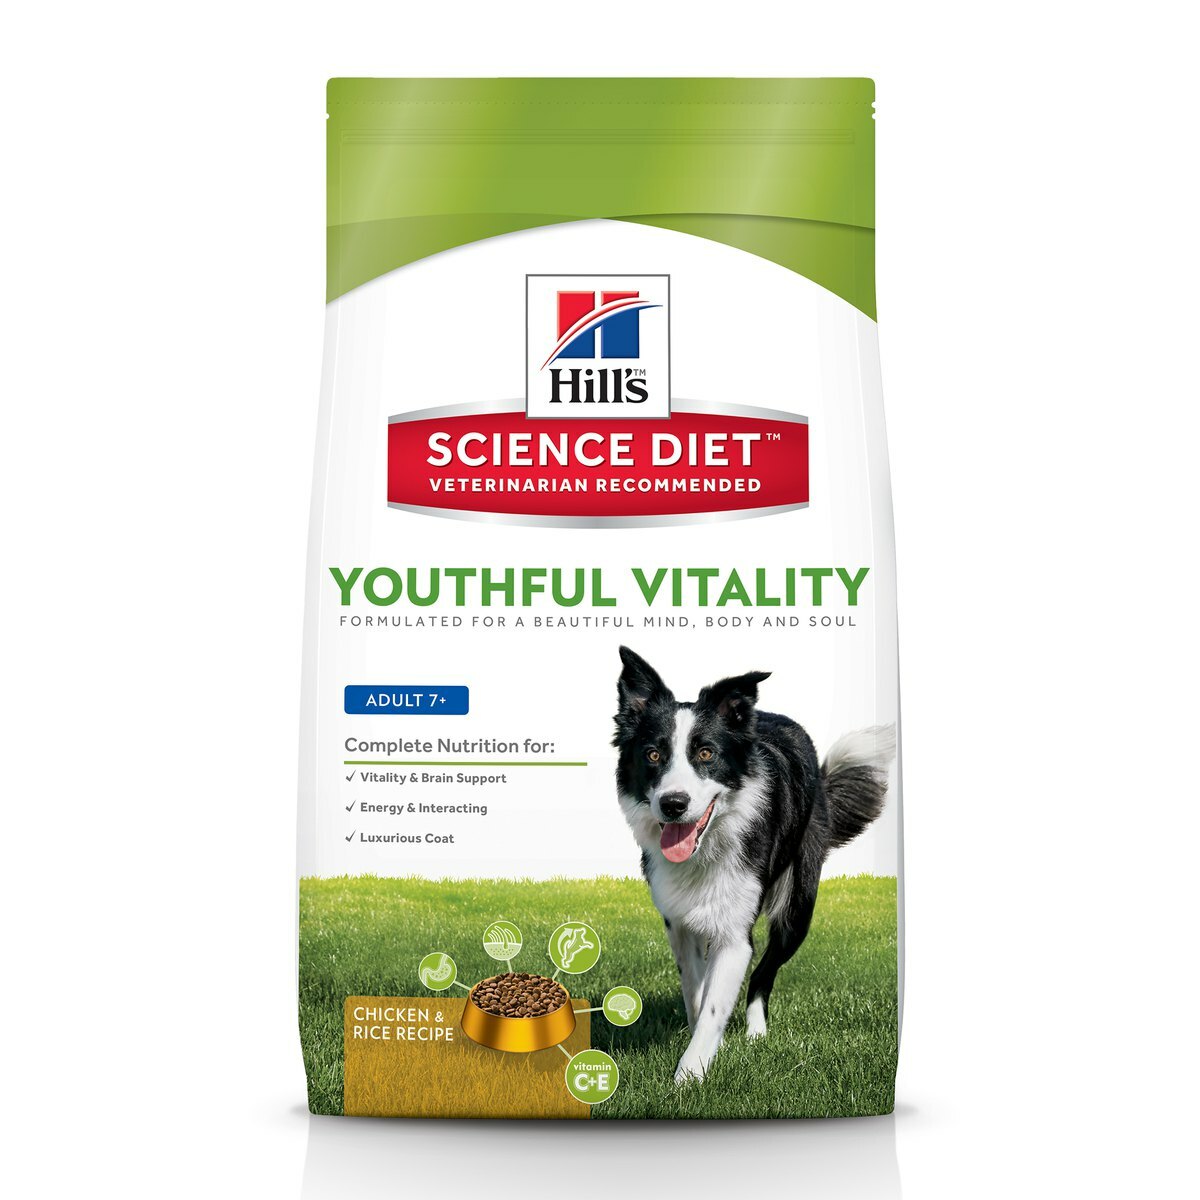 Hills Science Diet Adult 7+ Youthful Vitality Dry Dog Food image 1